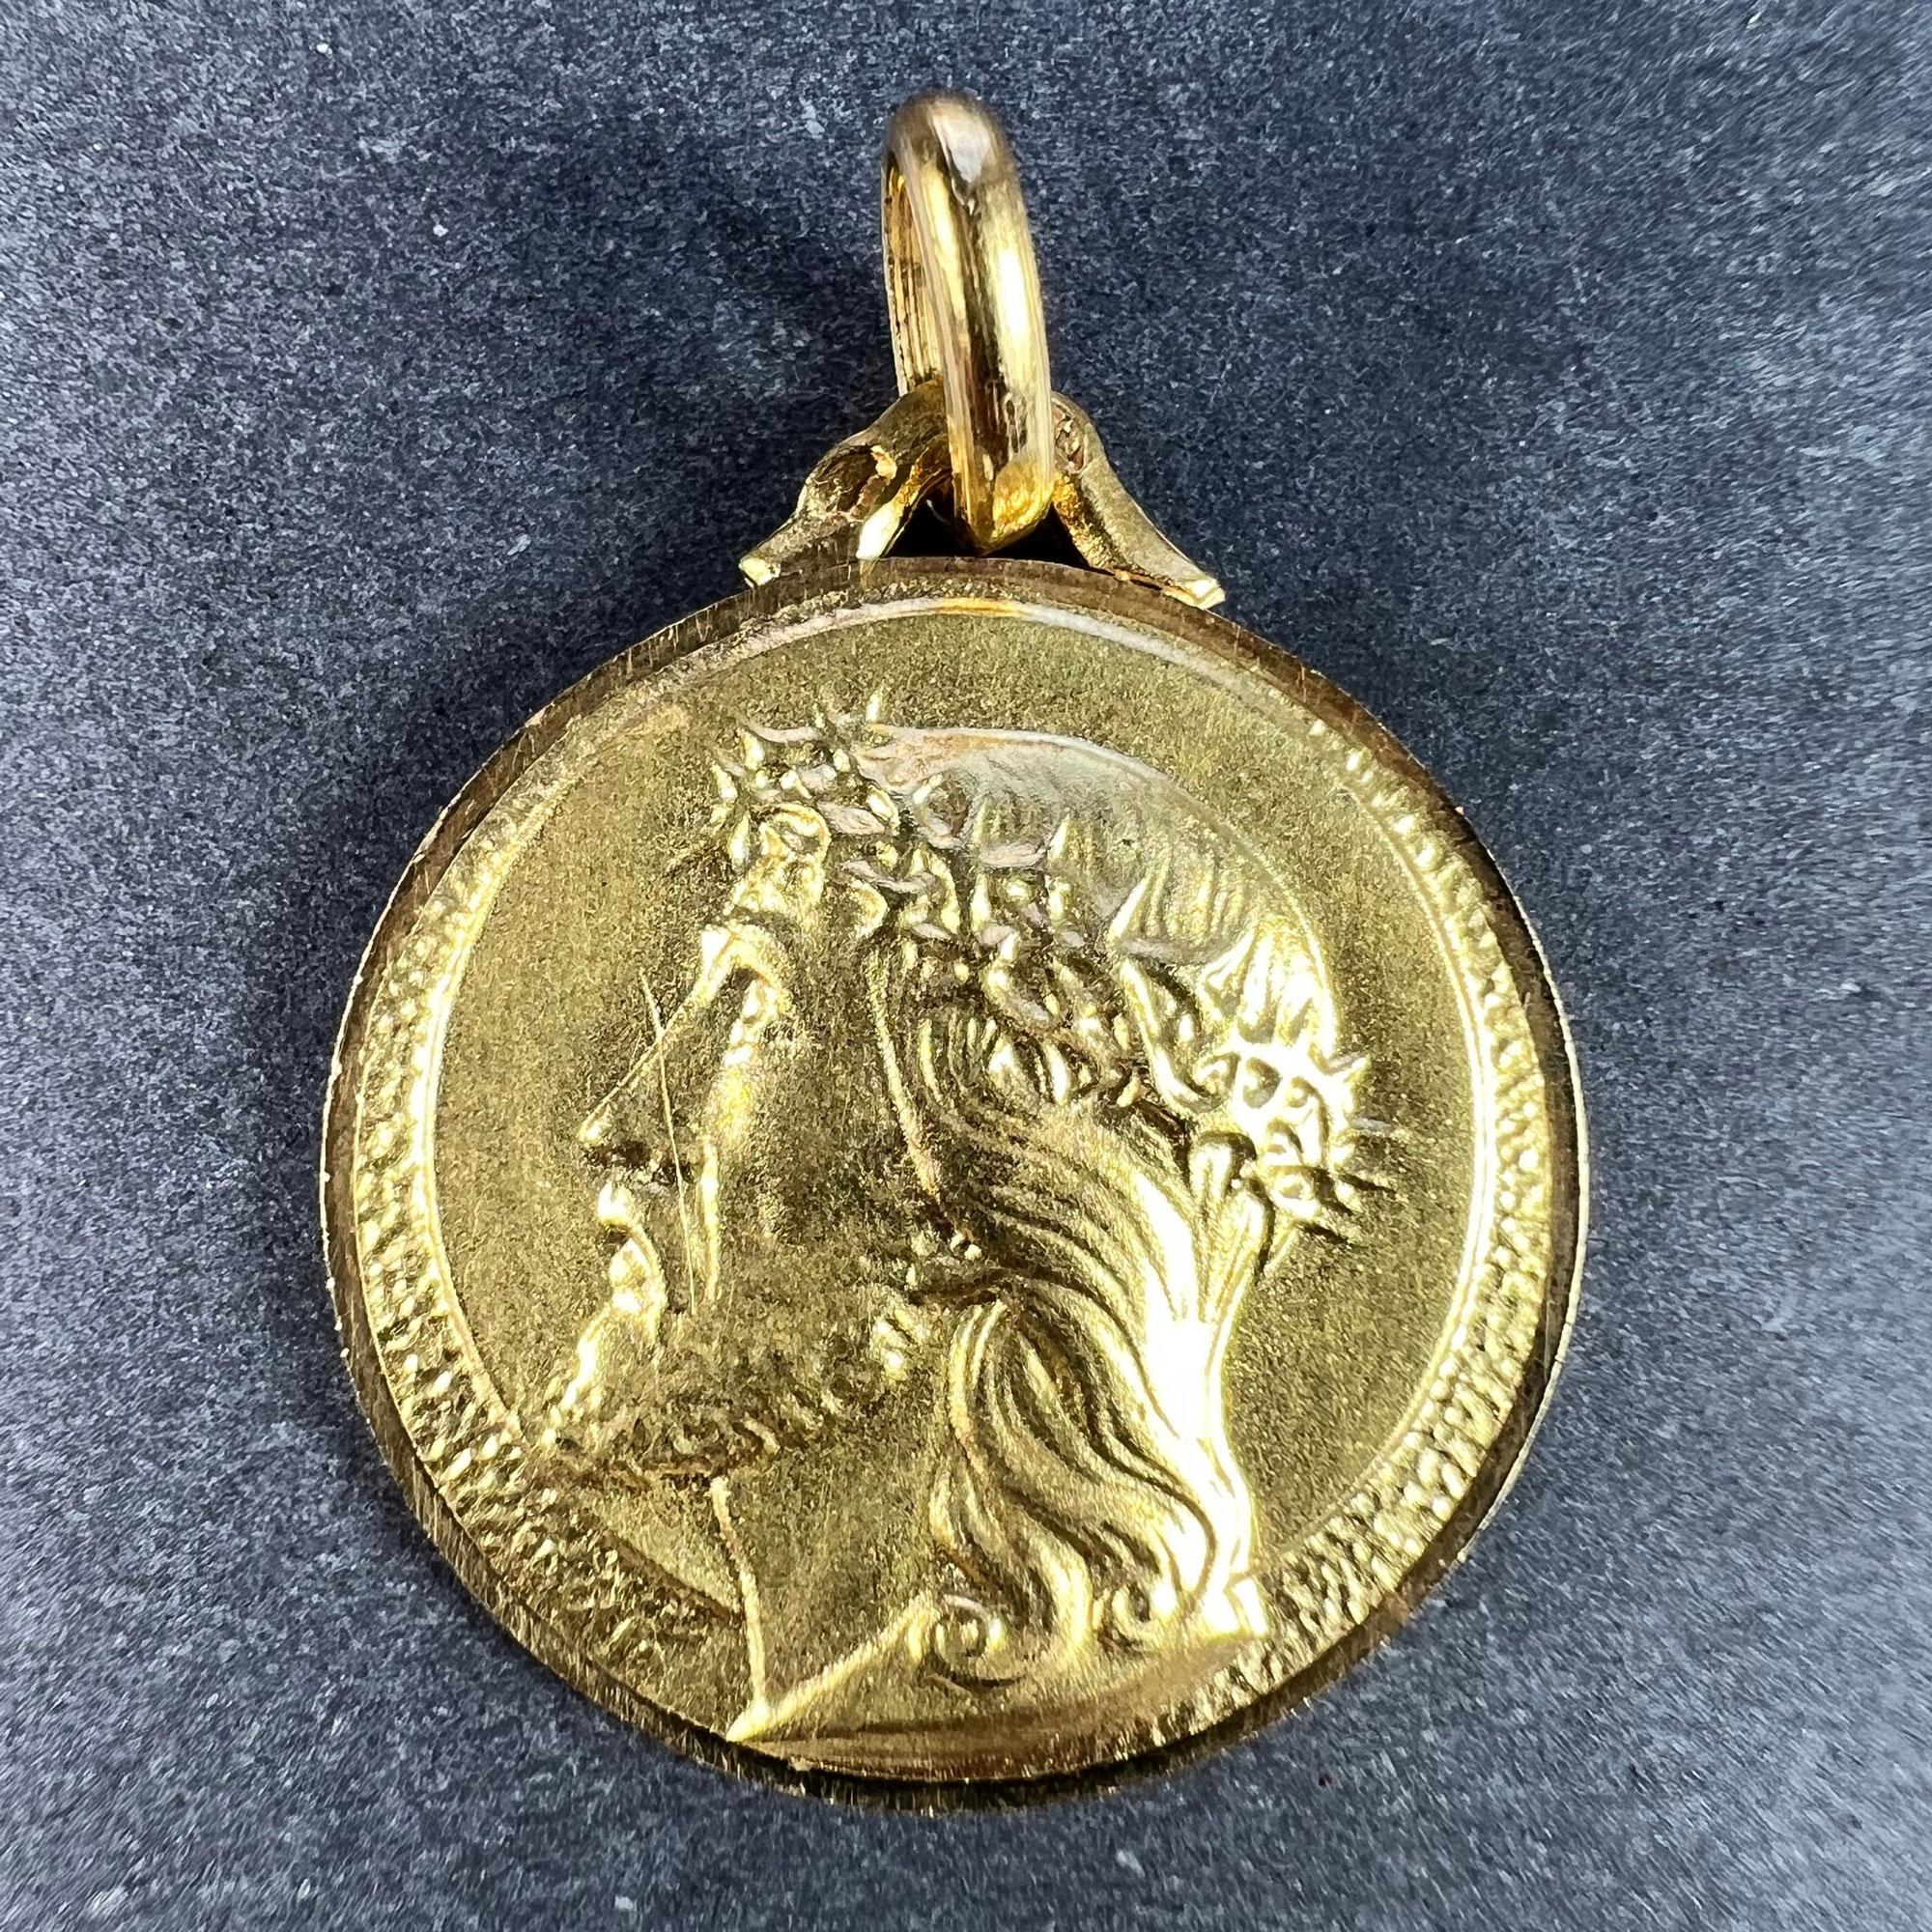 A French 18 karat (18K) yellow gold charm pendant designed as a round medal depicting the profile of Christ wearing the Crown of Thorns, with a halo surrounding him. Stamped with the eagle’s head for 18 karat gold and French manufacture, along with